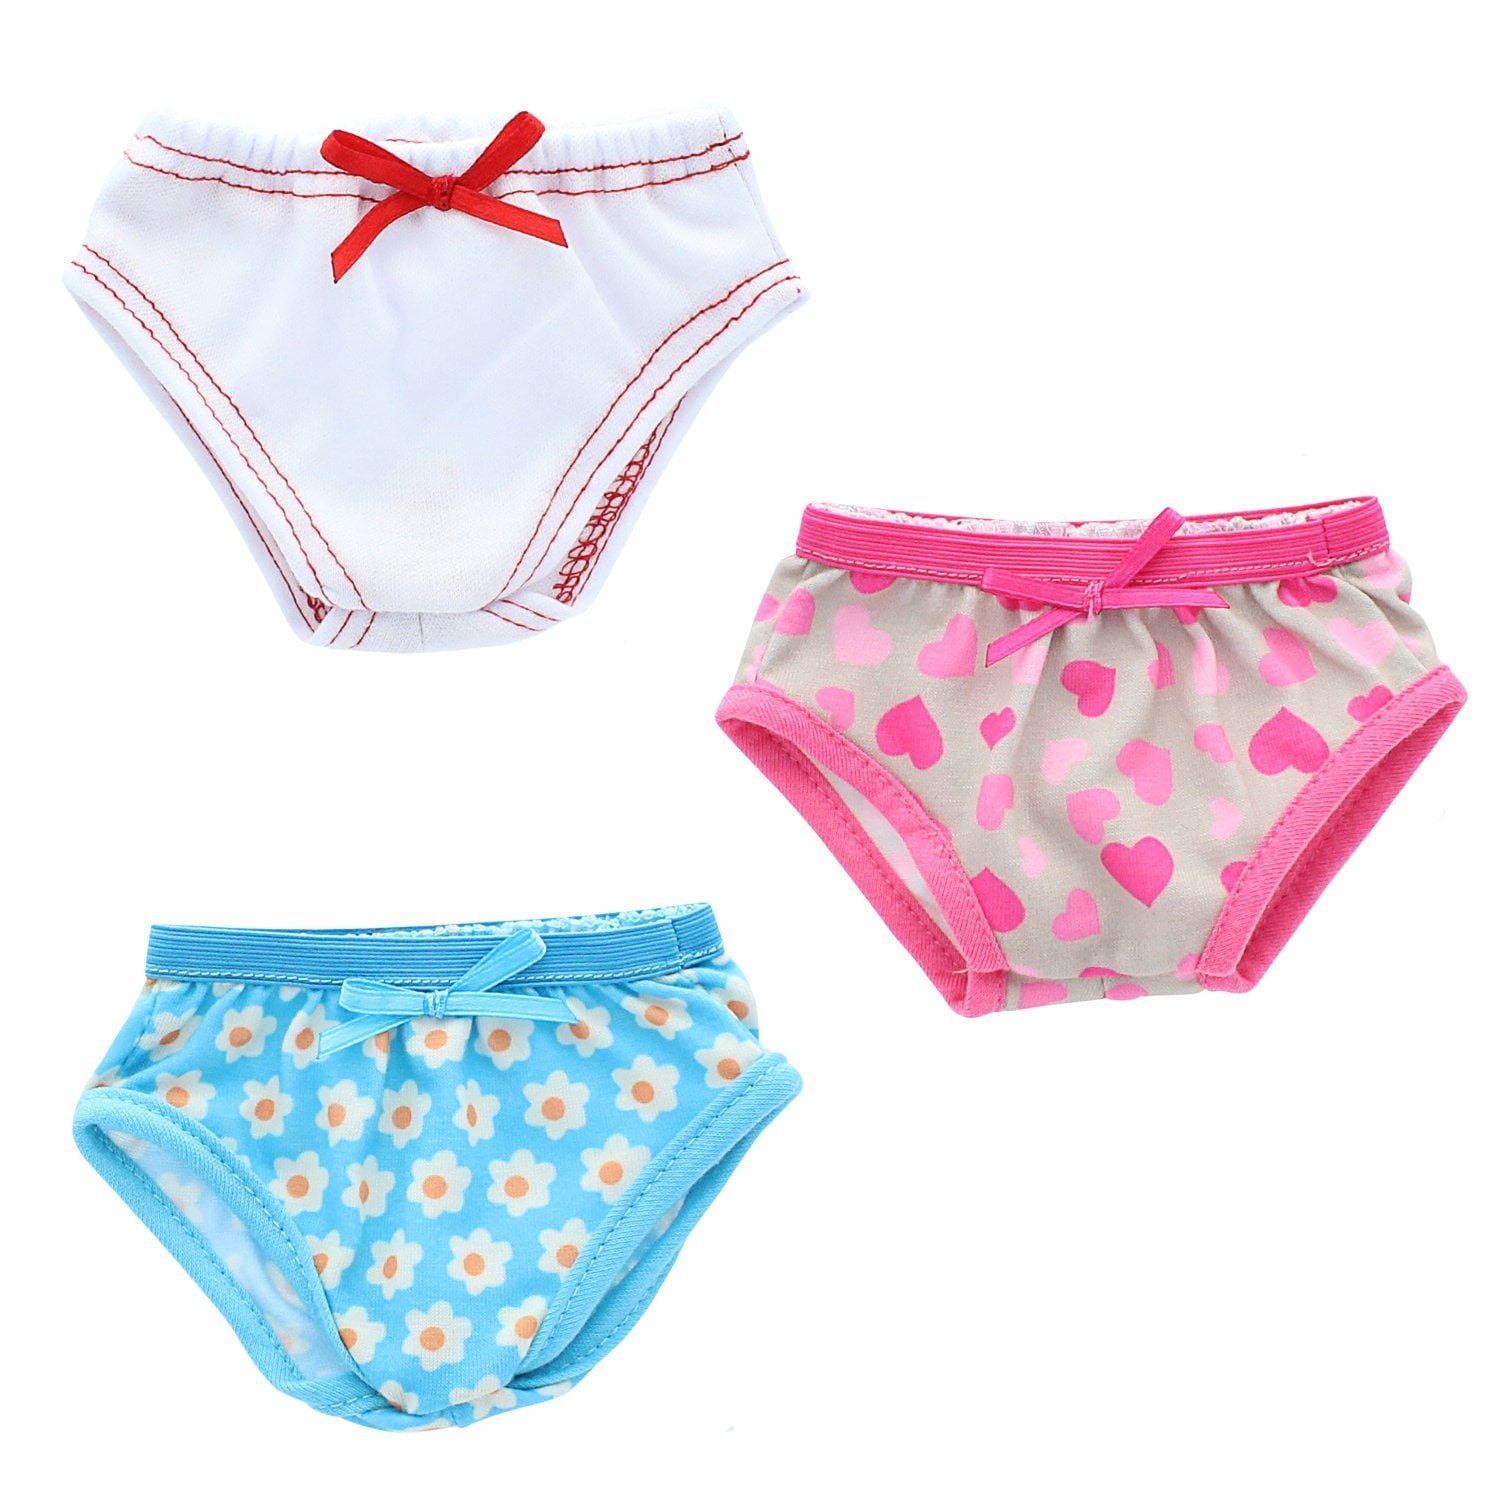 Doll Clothes - Underwear Panties Set Fits American Girl 18 inch